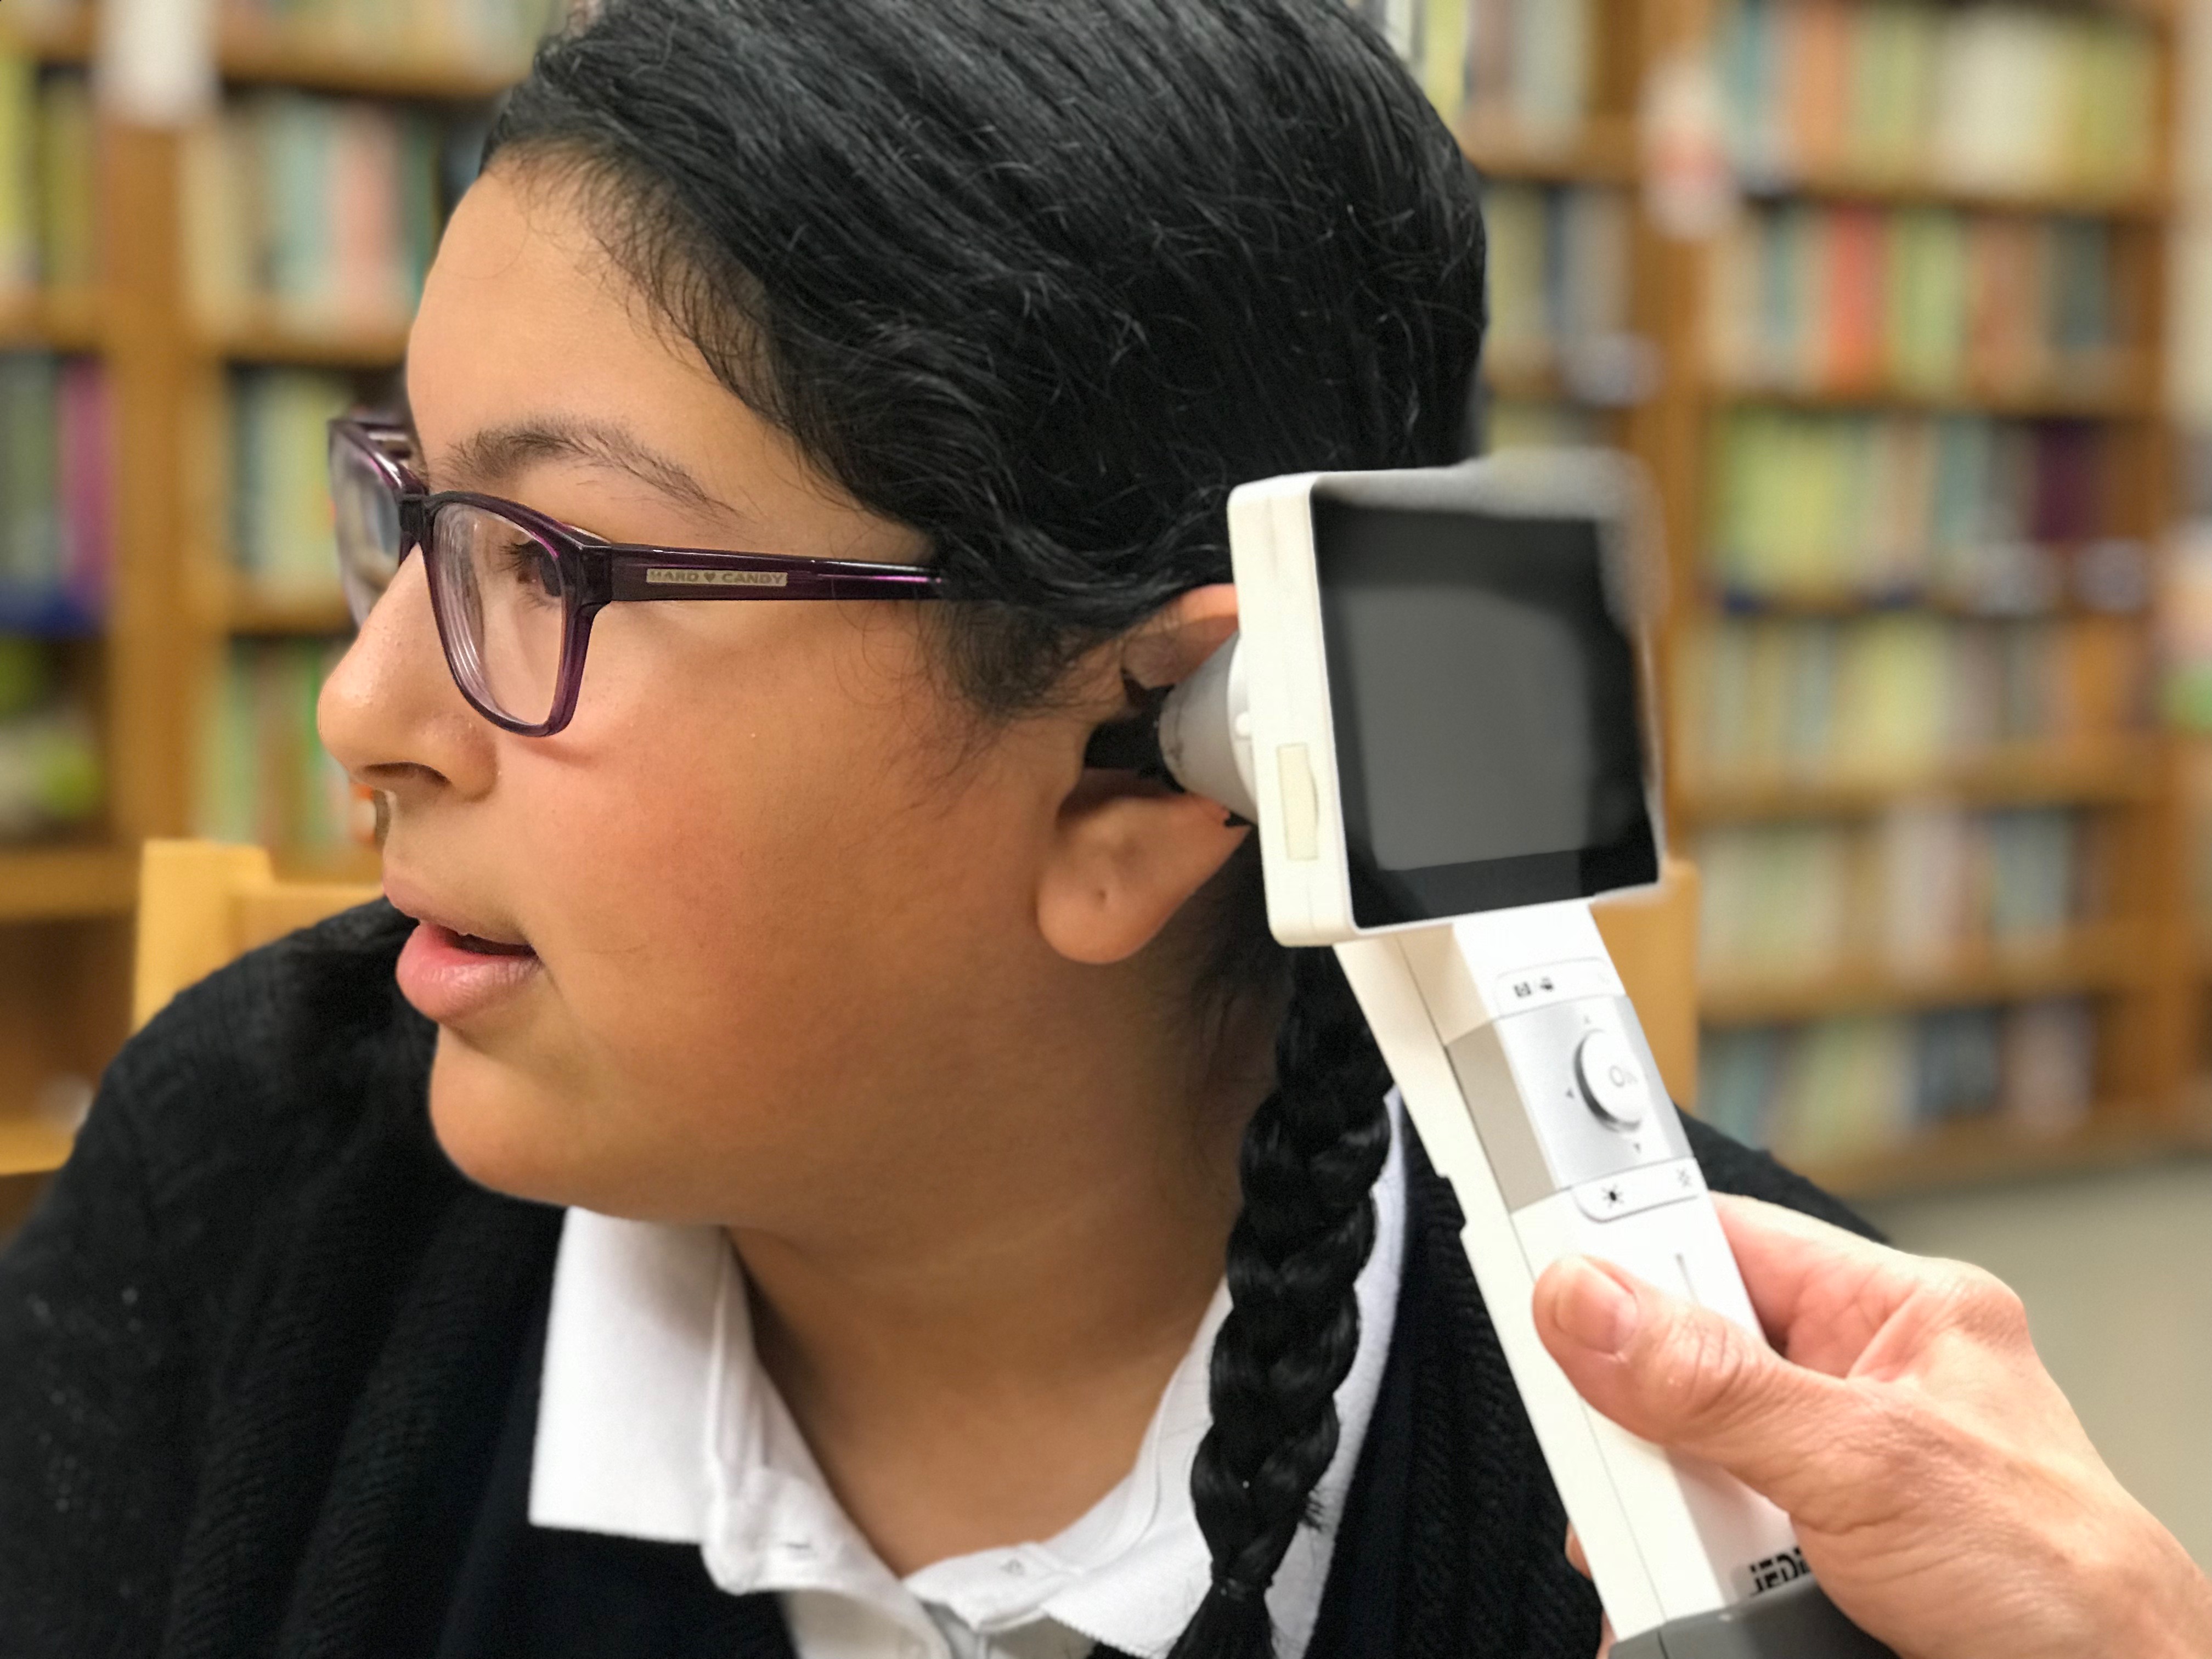 St. Pius V Catholic School student being checked out with the help of a telemedecine device